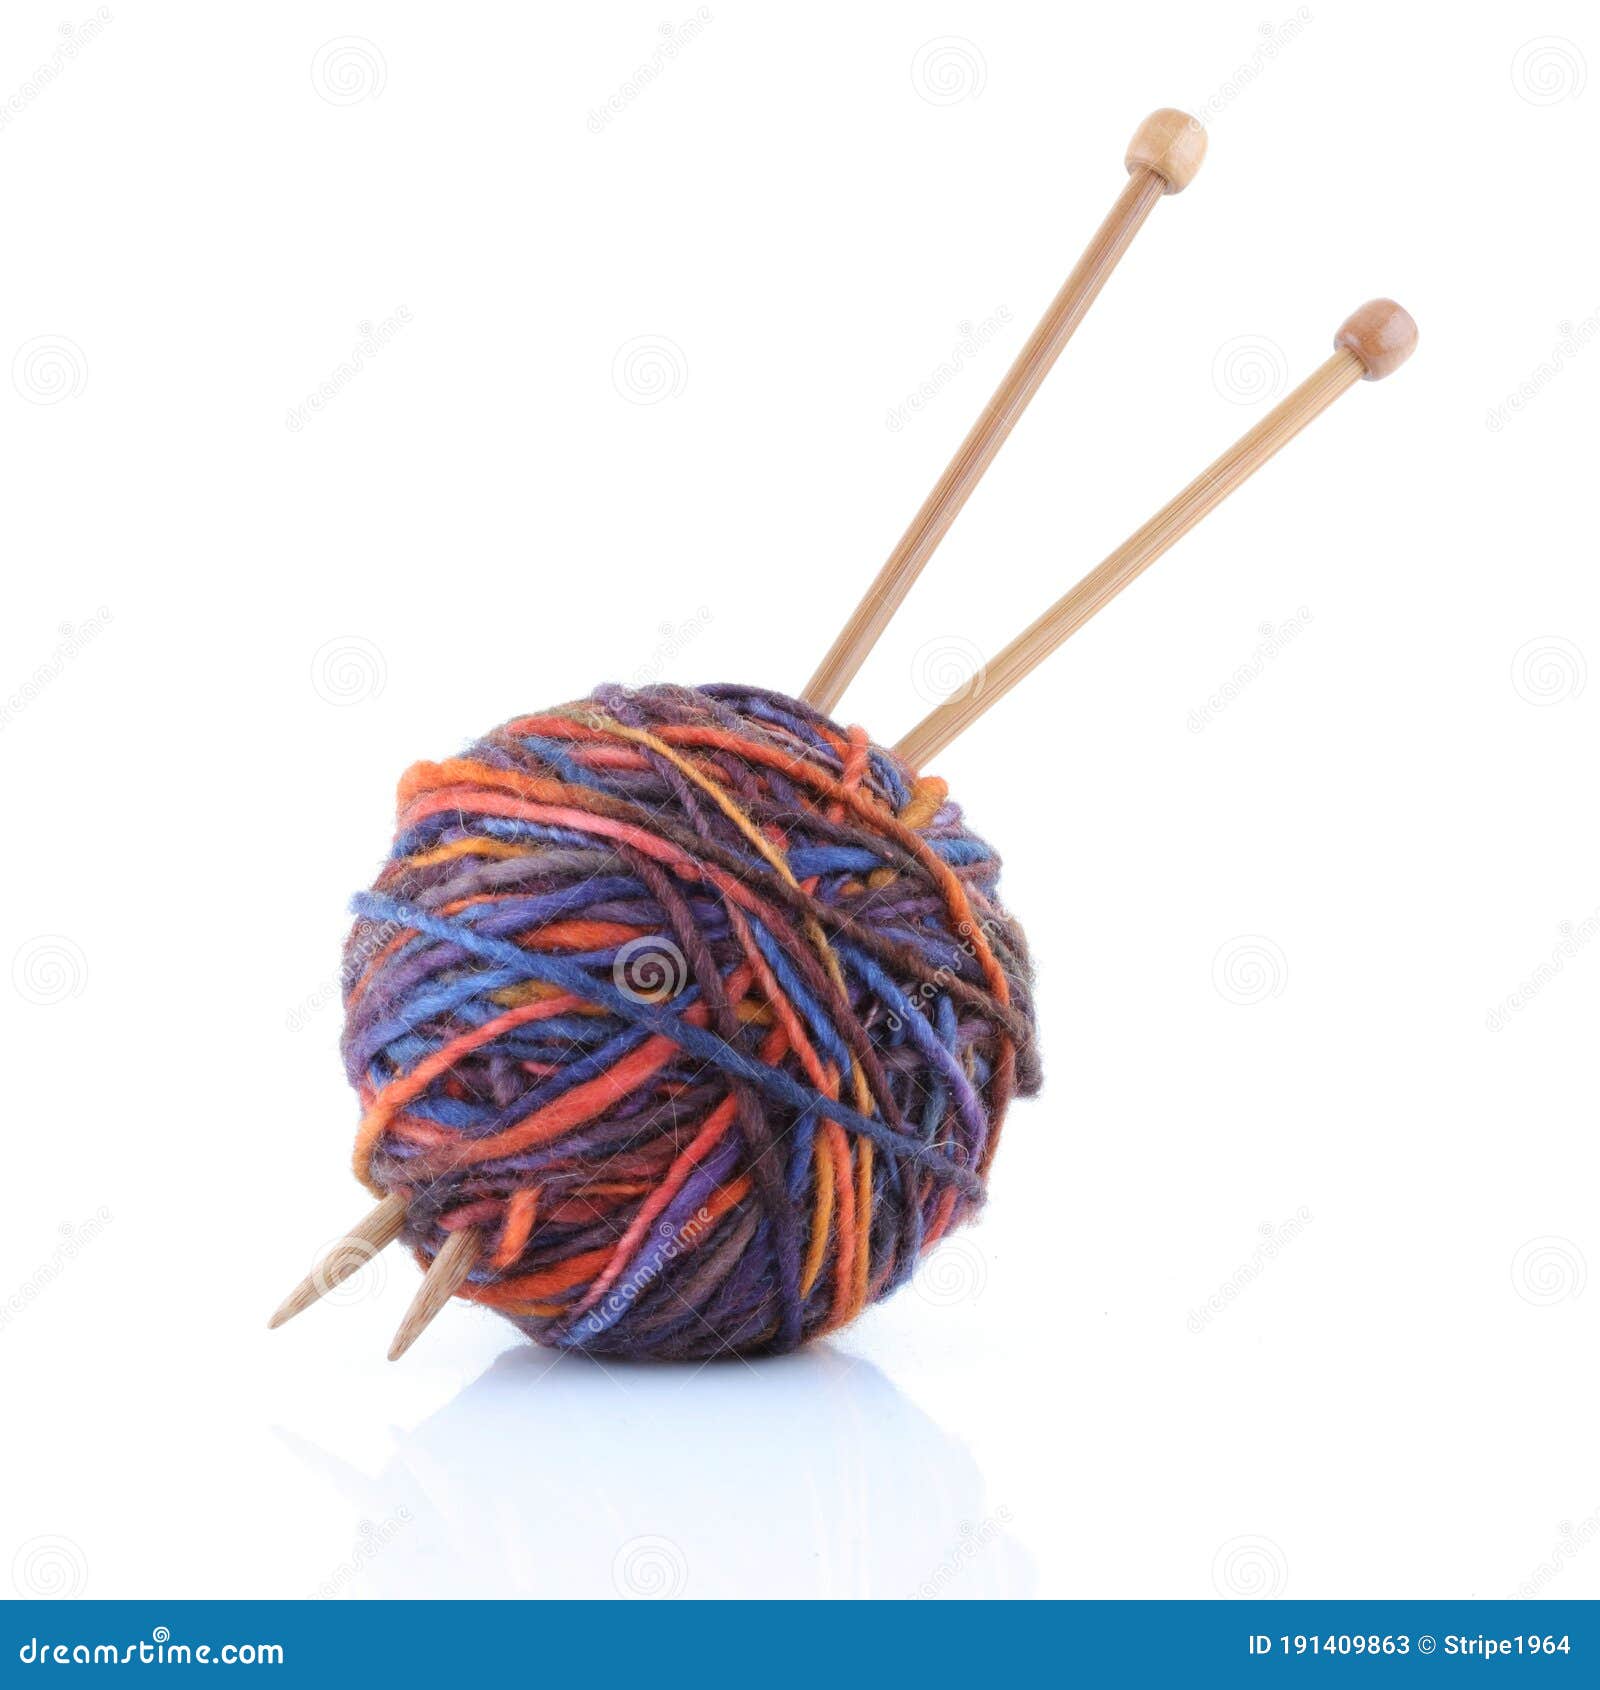 Albums 99+ Images ball of yarn with knitting needles Latest